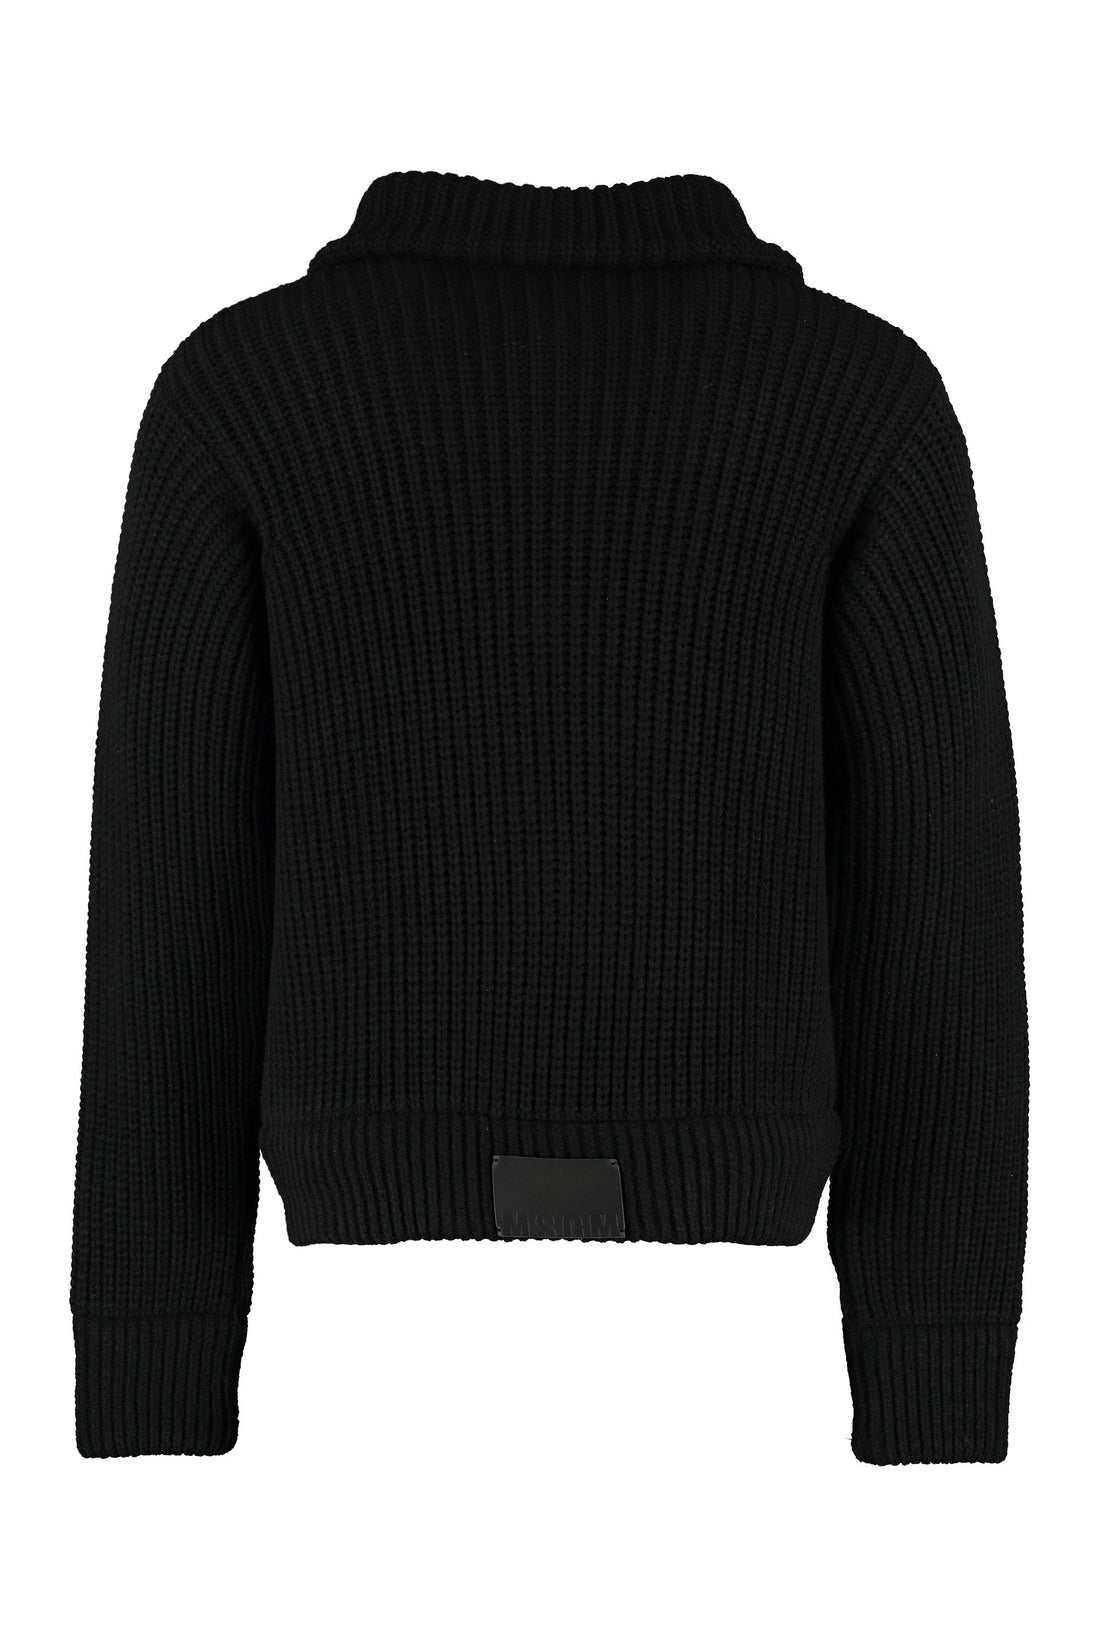 MSGM-OUTLET-SALE-High collar zipped cardigan-ARCHIVIST